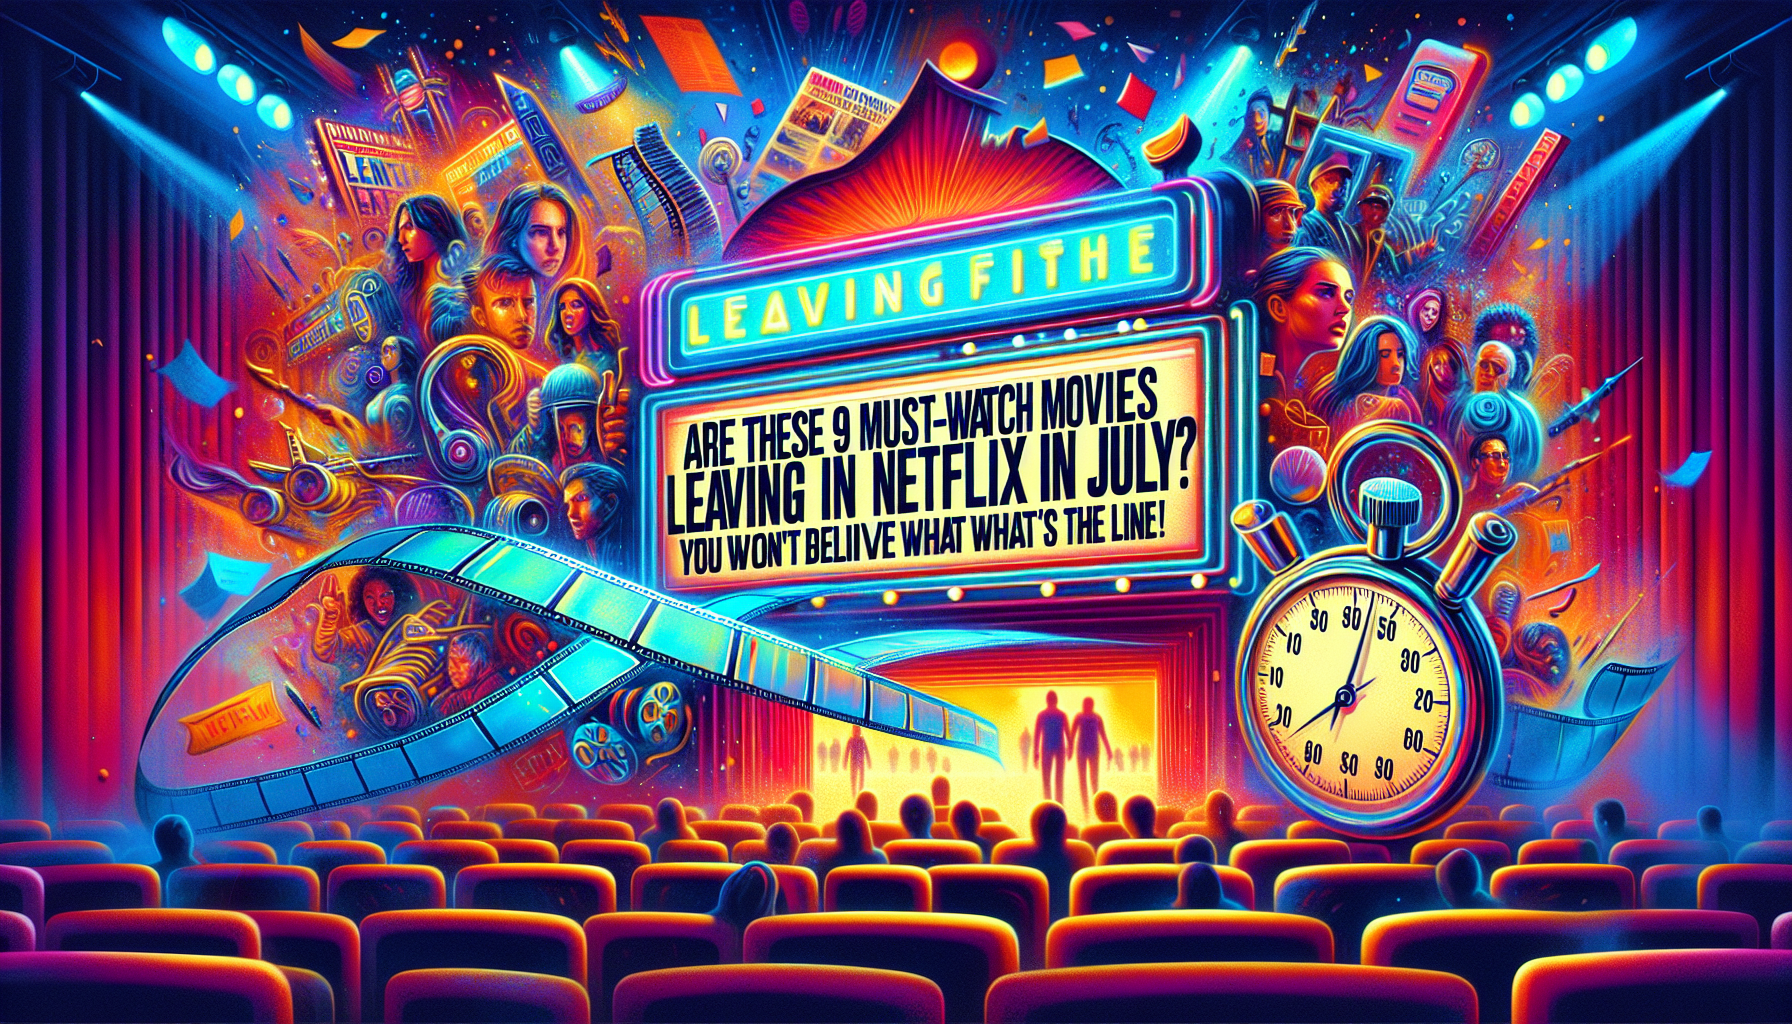 discover the 9 must-watch movies rumored to leave netflix in july. find out what's at stake and prepare to be amazed!